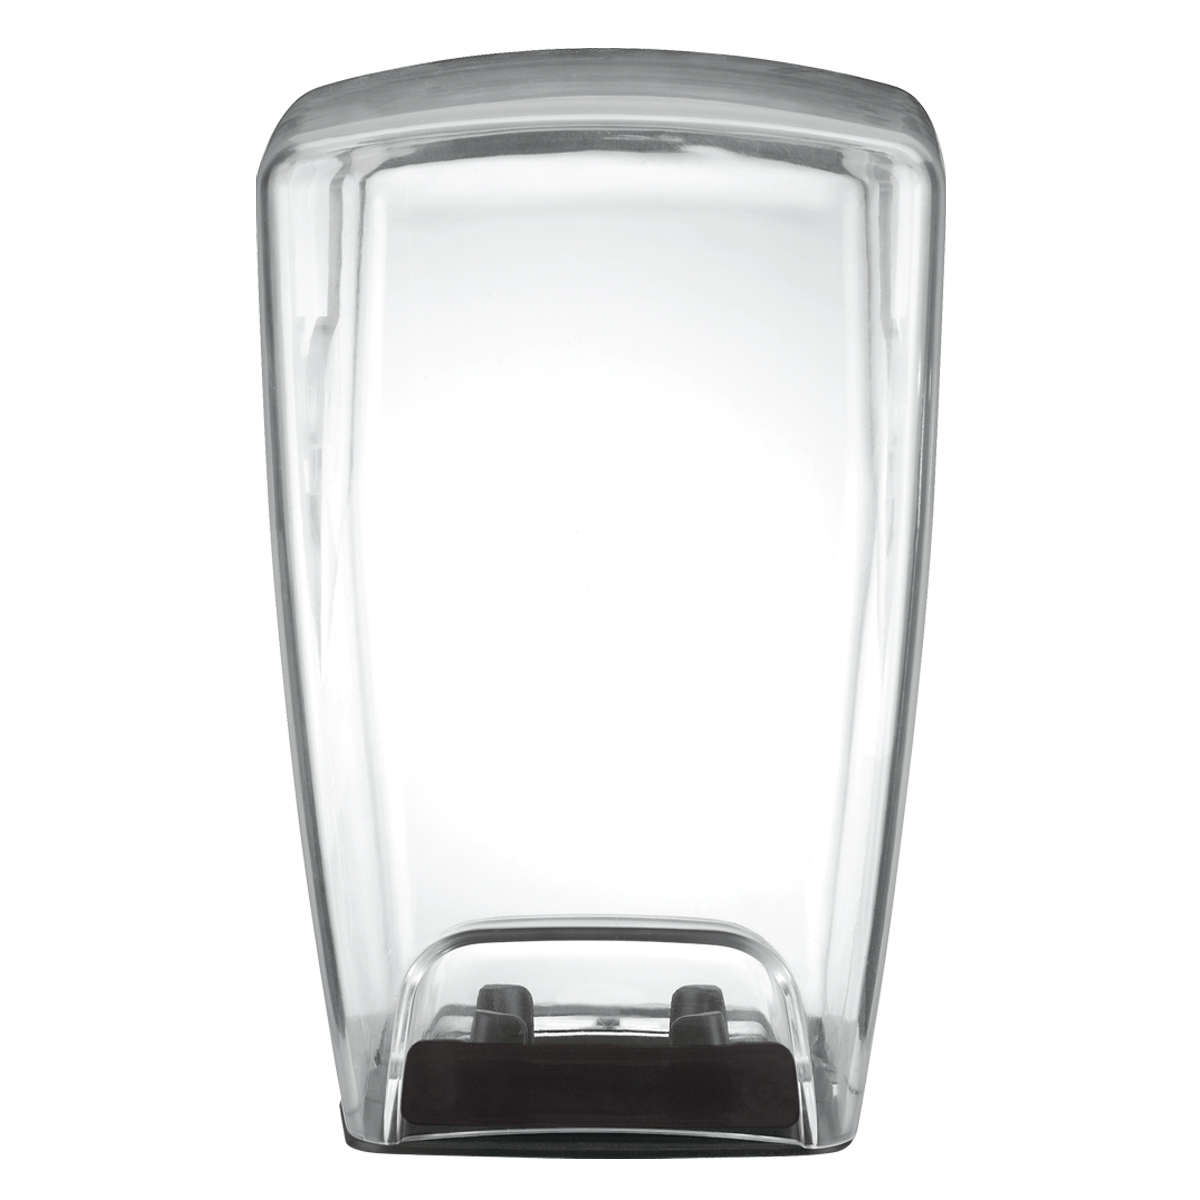 Conair™ Waring™ Extra-Large-Capacity Container for Blender